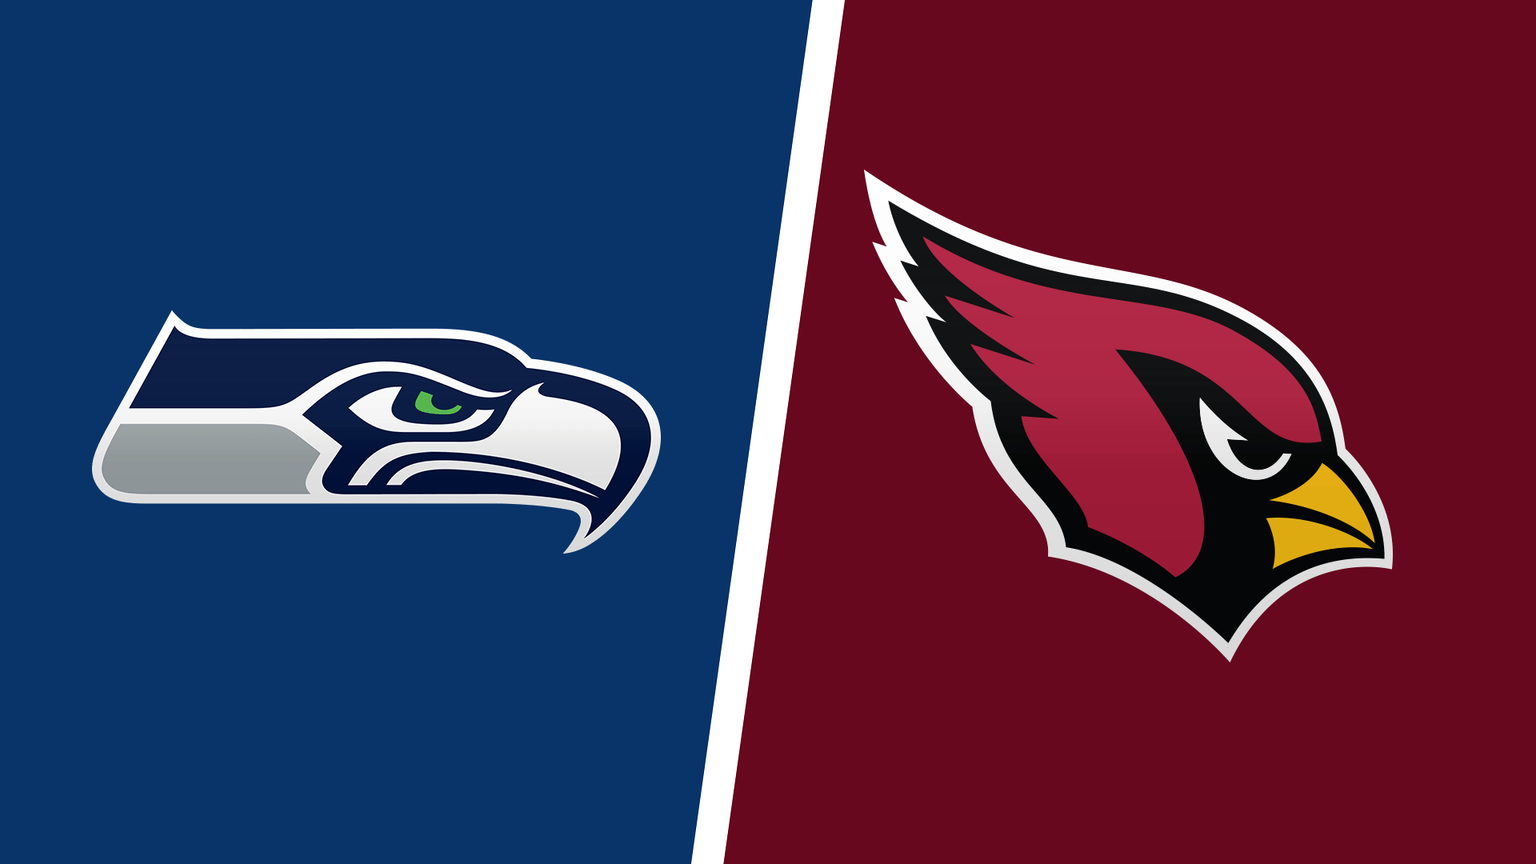 How to Watch Arizona Cardinals vs. Seattle Seahawks Week 6 Game Live Online on October 16, 2022: Streaming/TV Channels